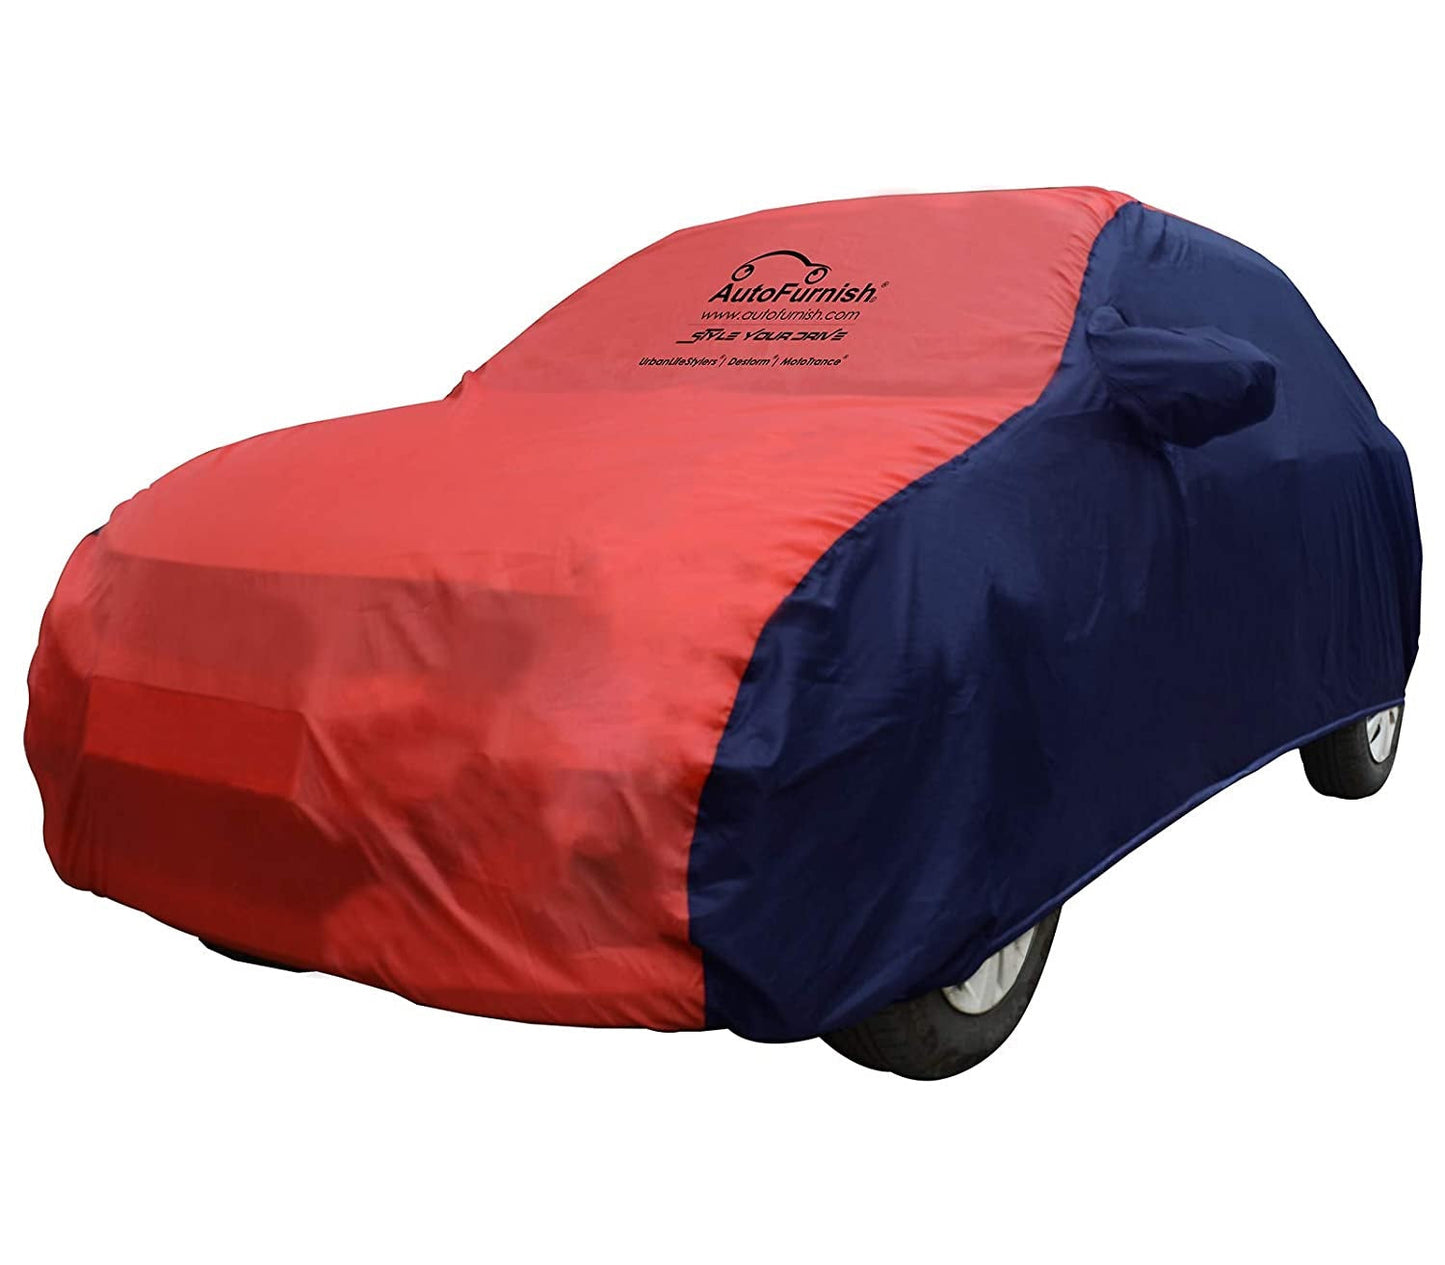 Hyundai Alcazar (2021) Car Body Cover, Triple Stitched, Heat & Water Resistant with Side Mirror Pockets (SPORTY Series)